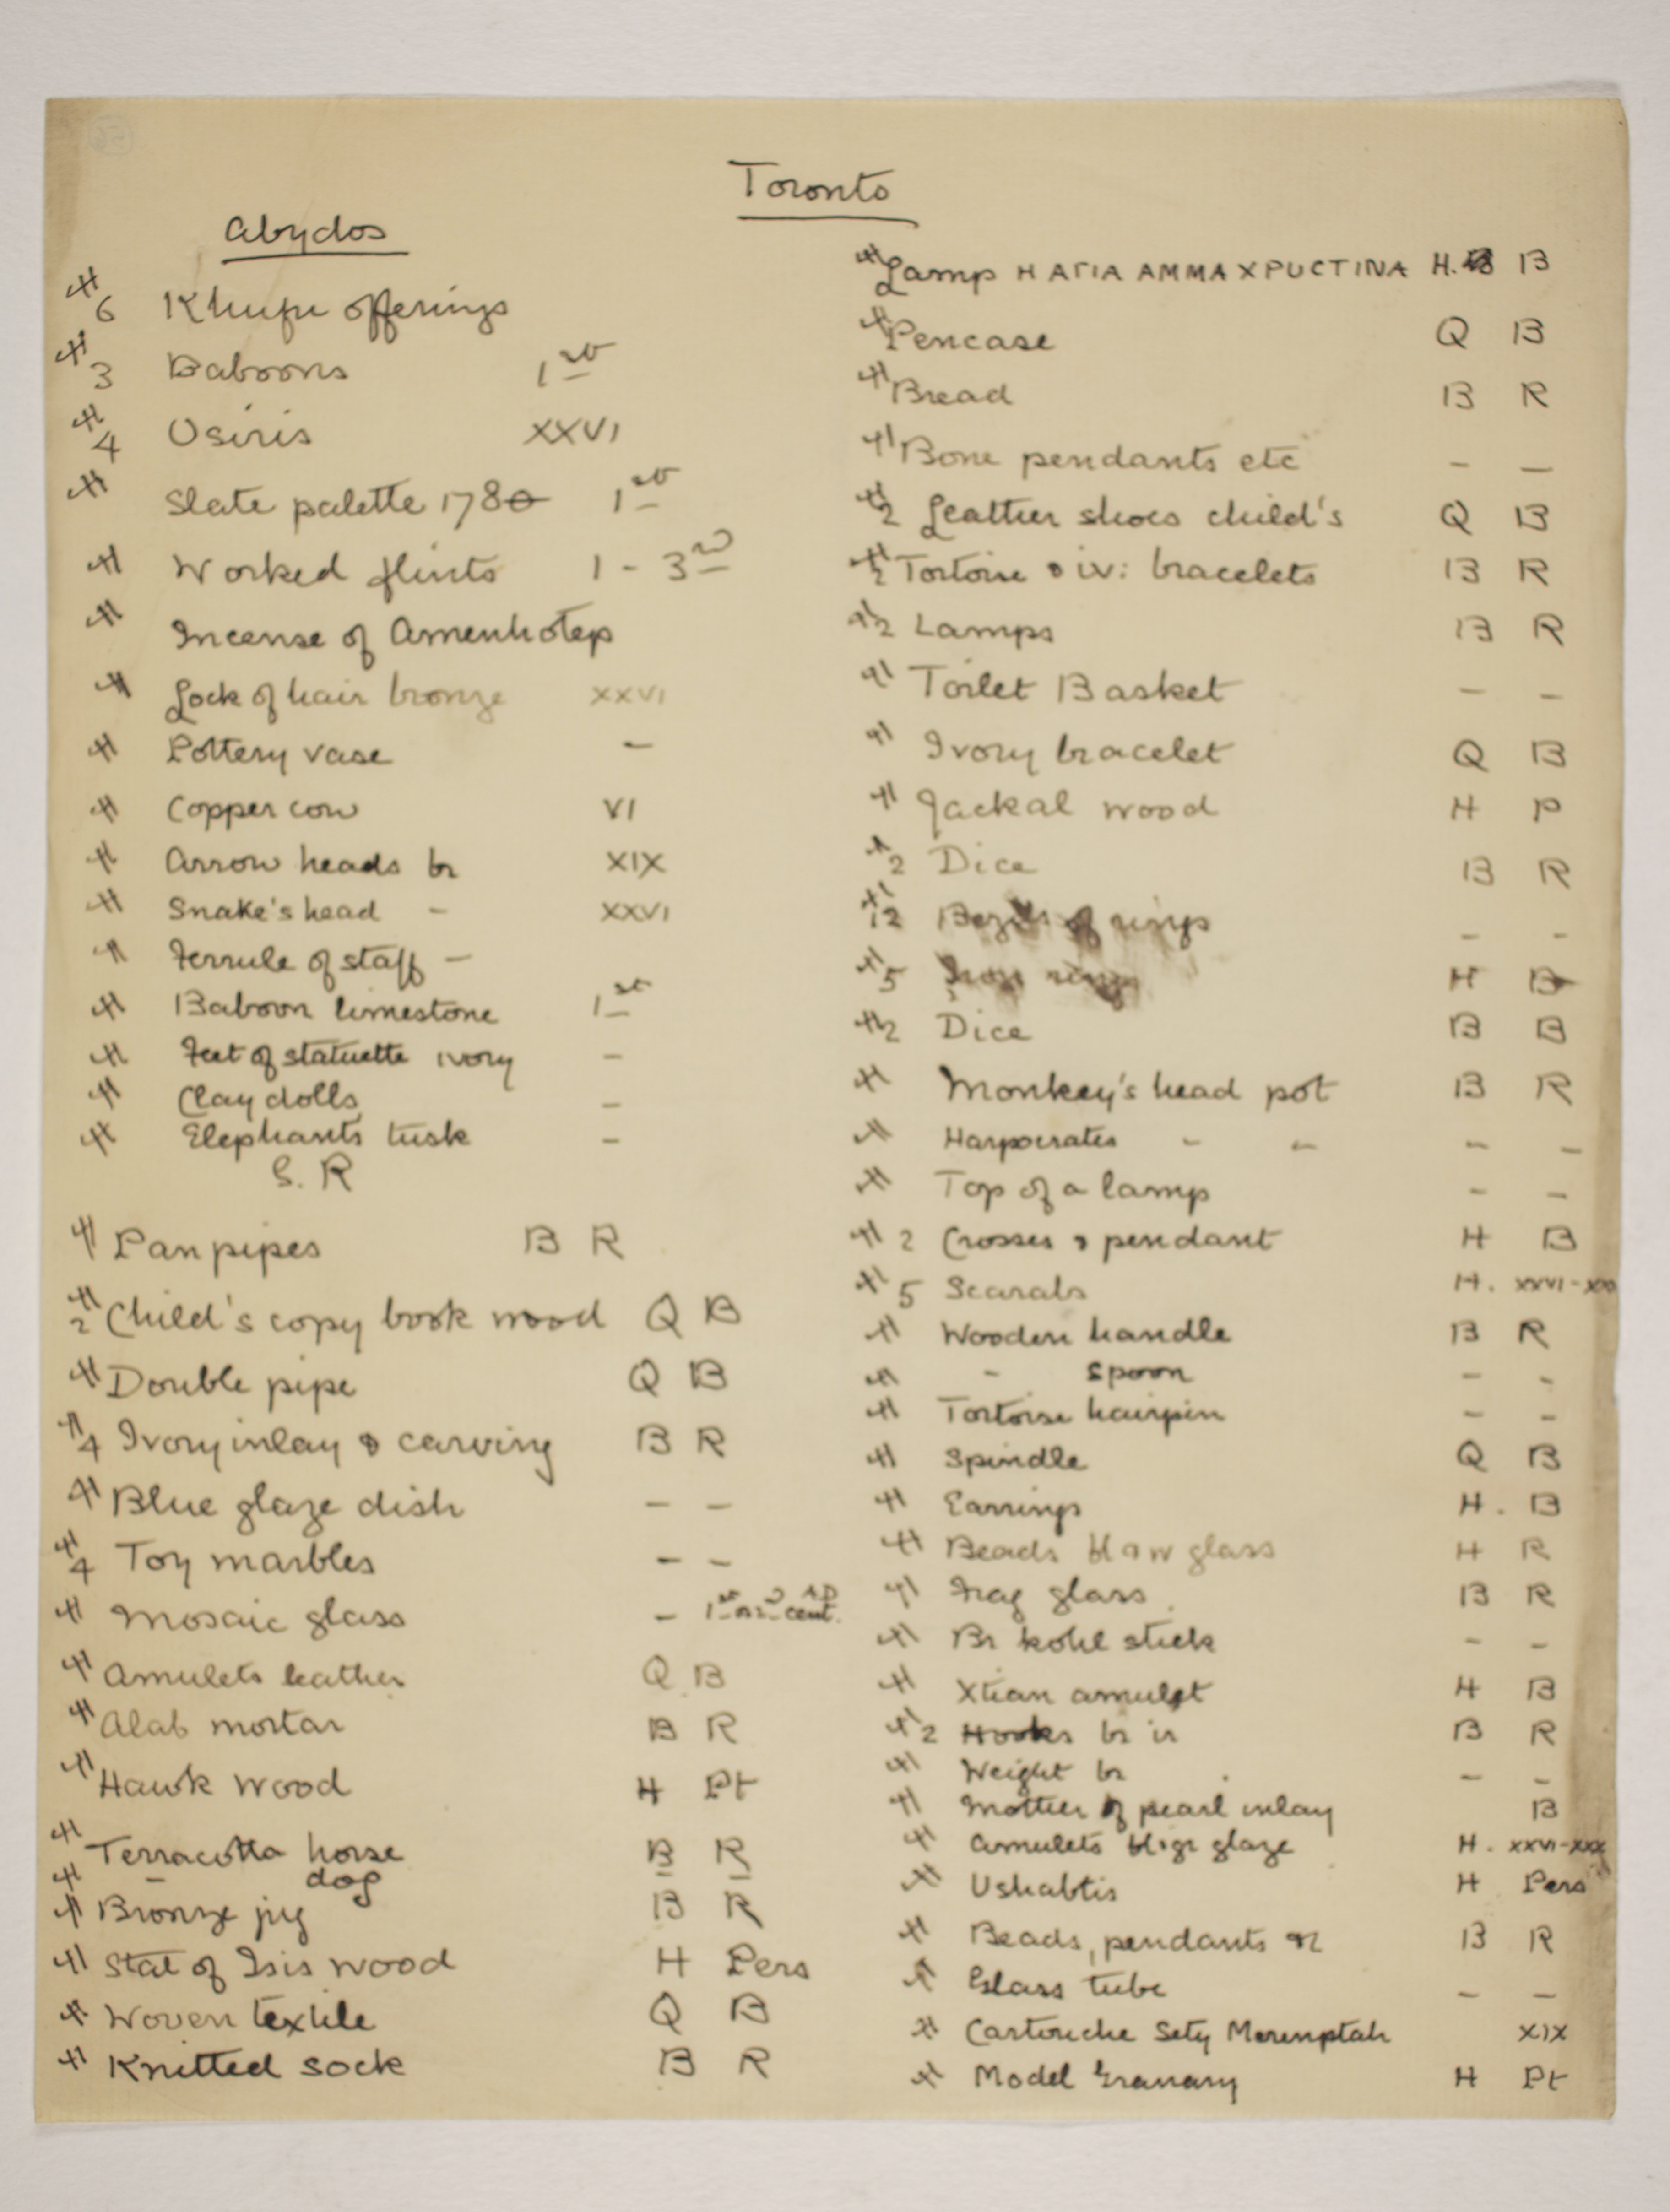 1902-03 Abydos Individual institution list  PMA/WFP1/D/11/56